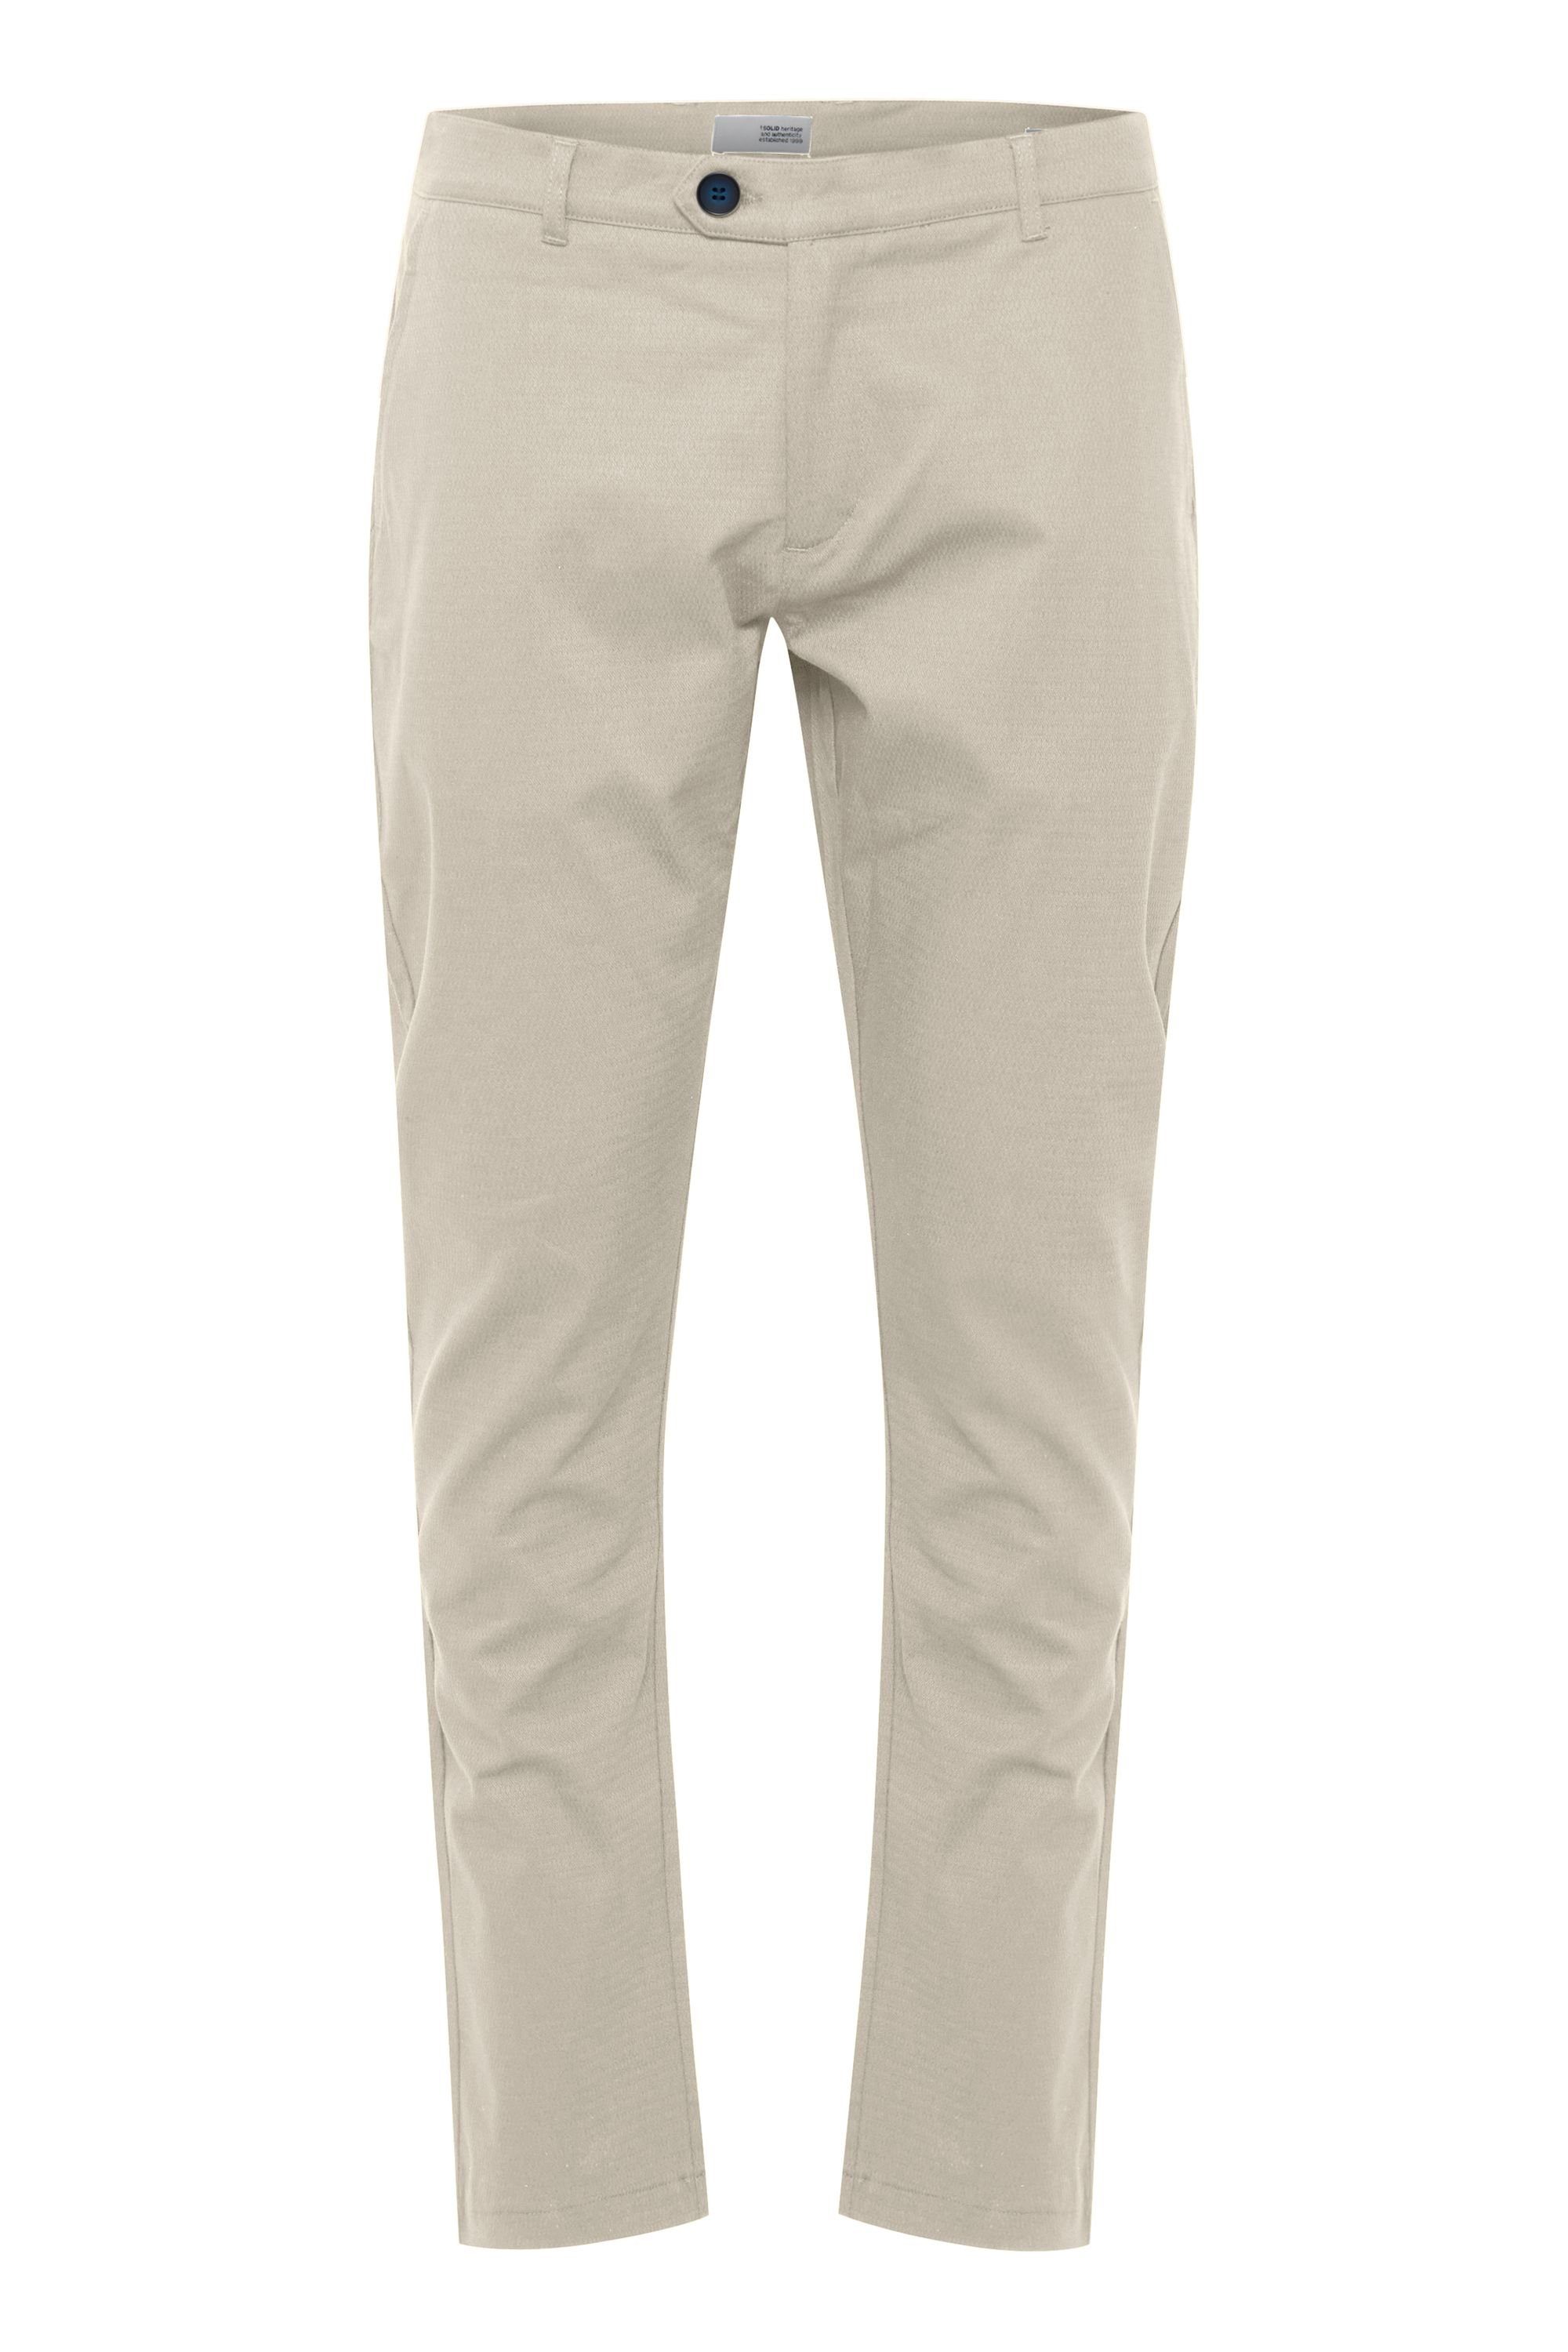 TOFilip OATMEAL Stoffhose !Solid 21202236 Structure (130401)